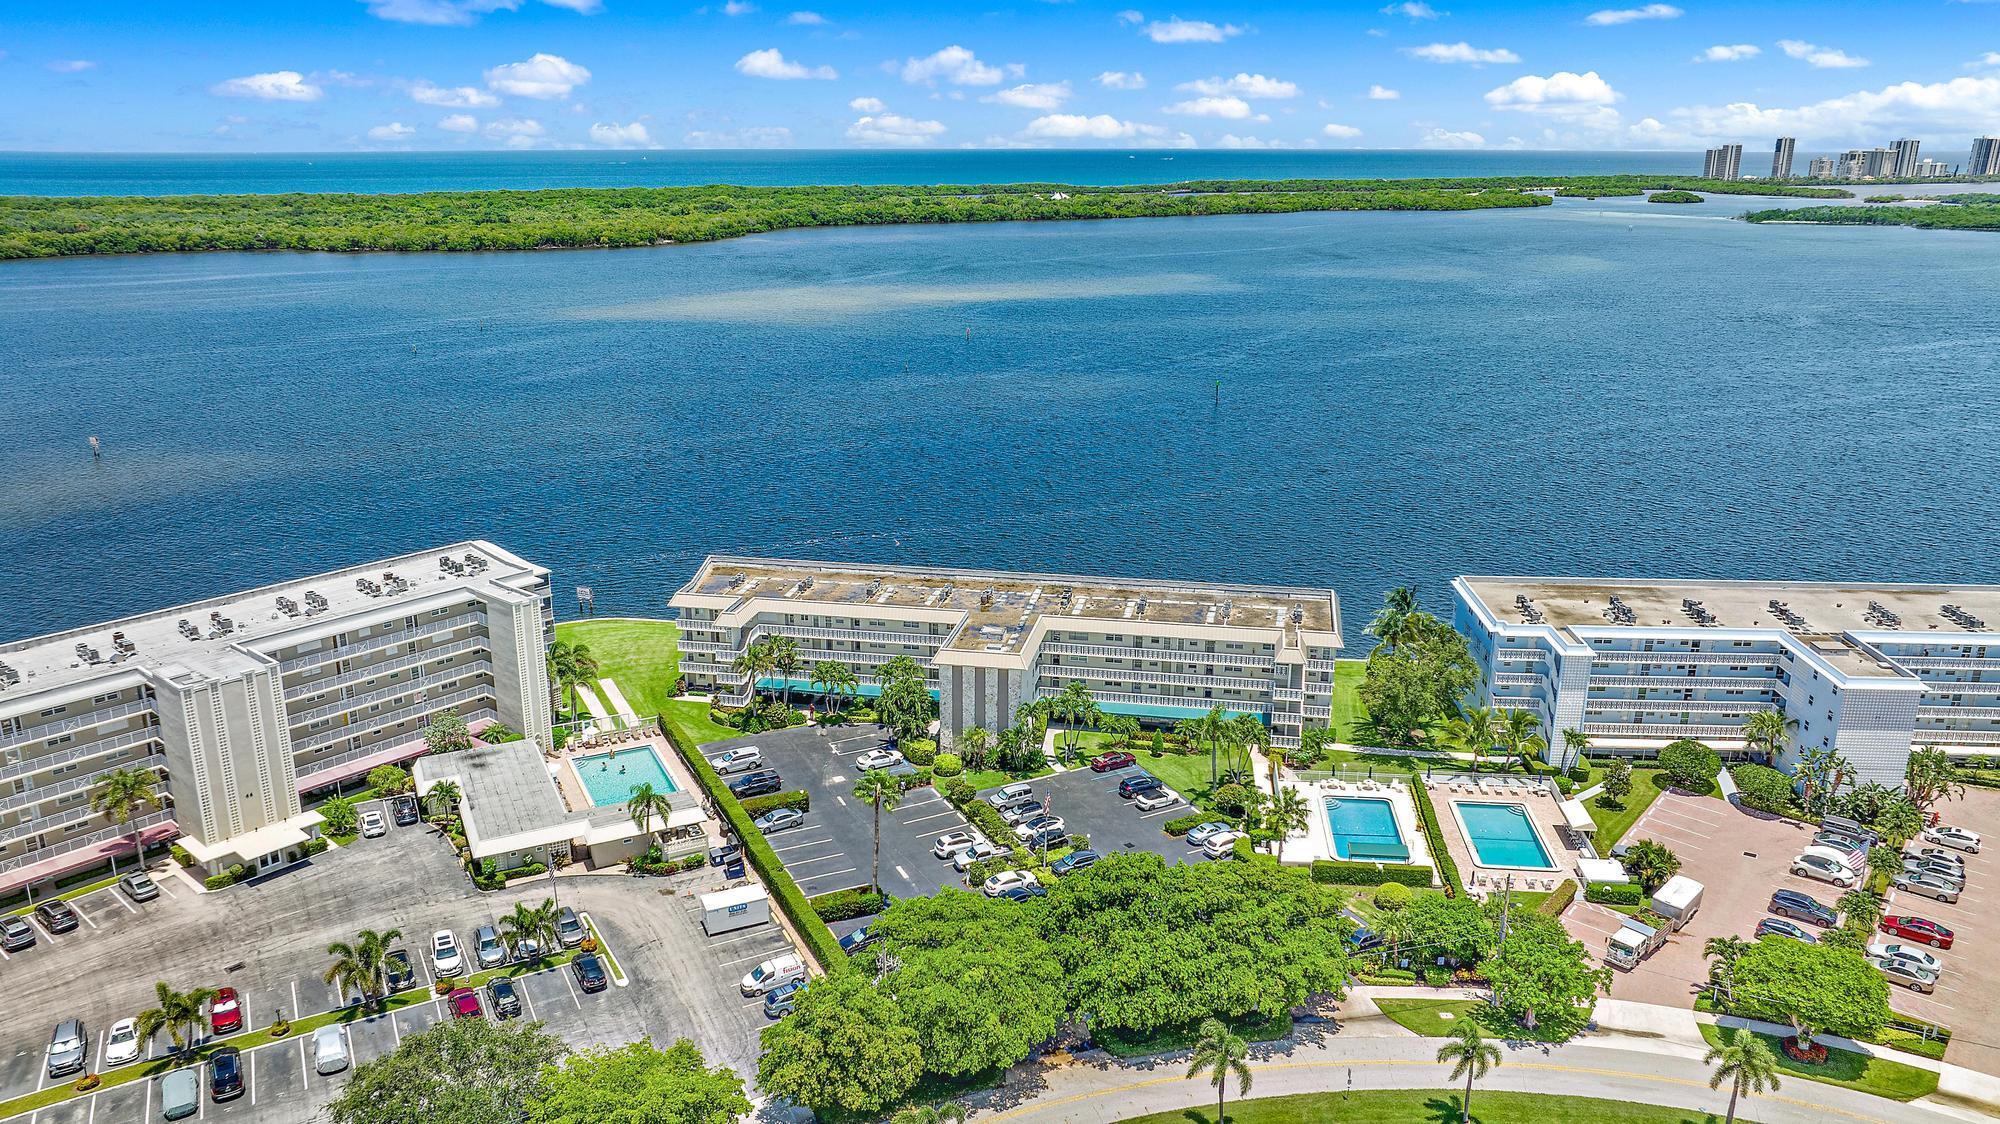 Coastal condo with the most amazing Intracoastal WATER views! Relax and enjoy the gorgeous sunrise each morning, and the beautiful moon light each night, from your stunningly UPDATED condo.  Every day will feel like vacation! You will fall in LOVE with this 2 bed / 2 bath condo from the moment you step inside. The warm industrial vibes make this a unique coastal retreat. Tons of Upgrades! The brand new kitchen includes wood cabinetry, granite countertops, & stainless steel appliances. Luxury Vinyl flooring throughout. Impact Windows. This spectacular unit is move-in ready! Enjoy the pool and social atmosphere of this active 55+ community. Located in North Palm Beach, just minutes to gorgeous beaches, amazing restaurants & fabulous golf.